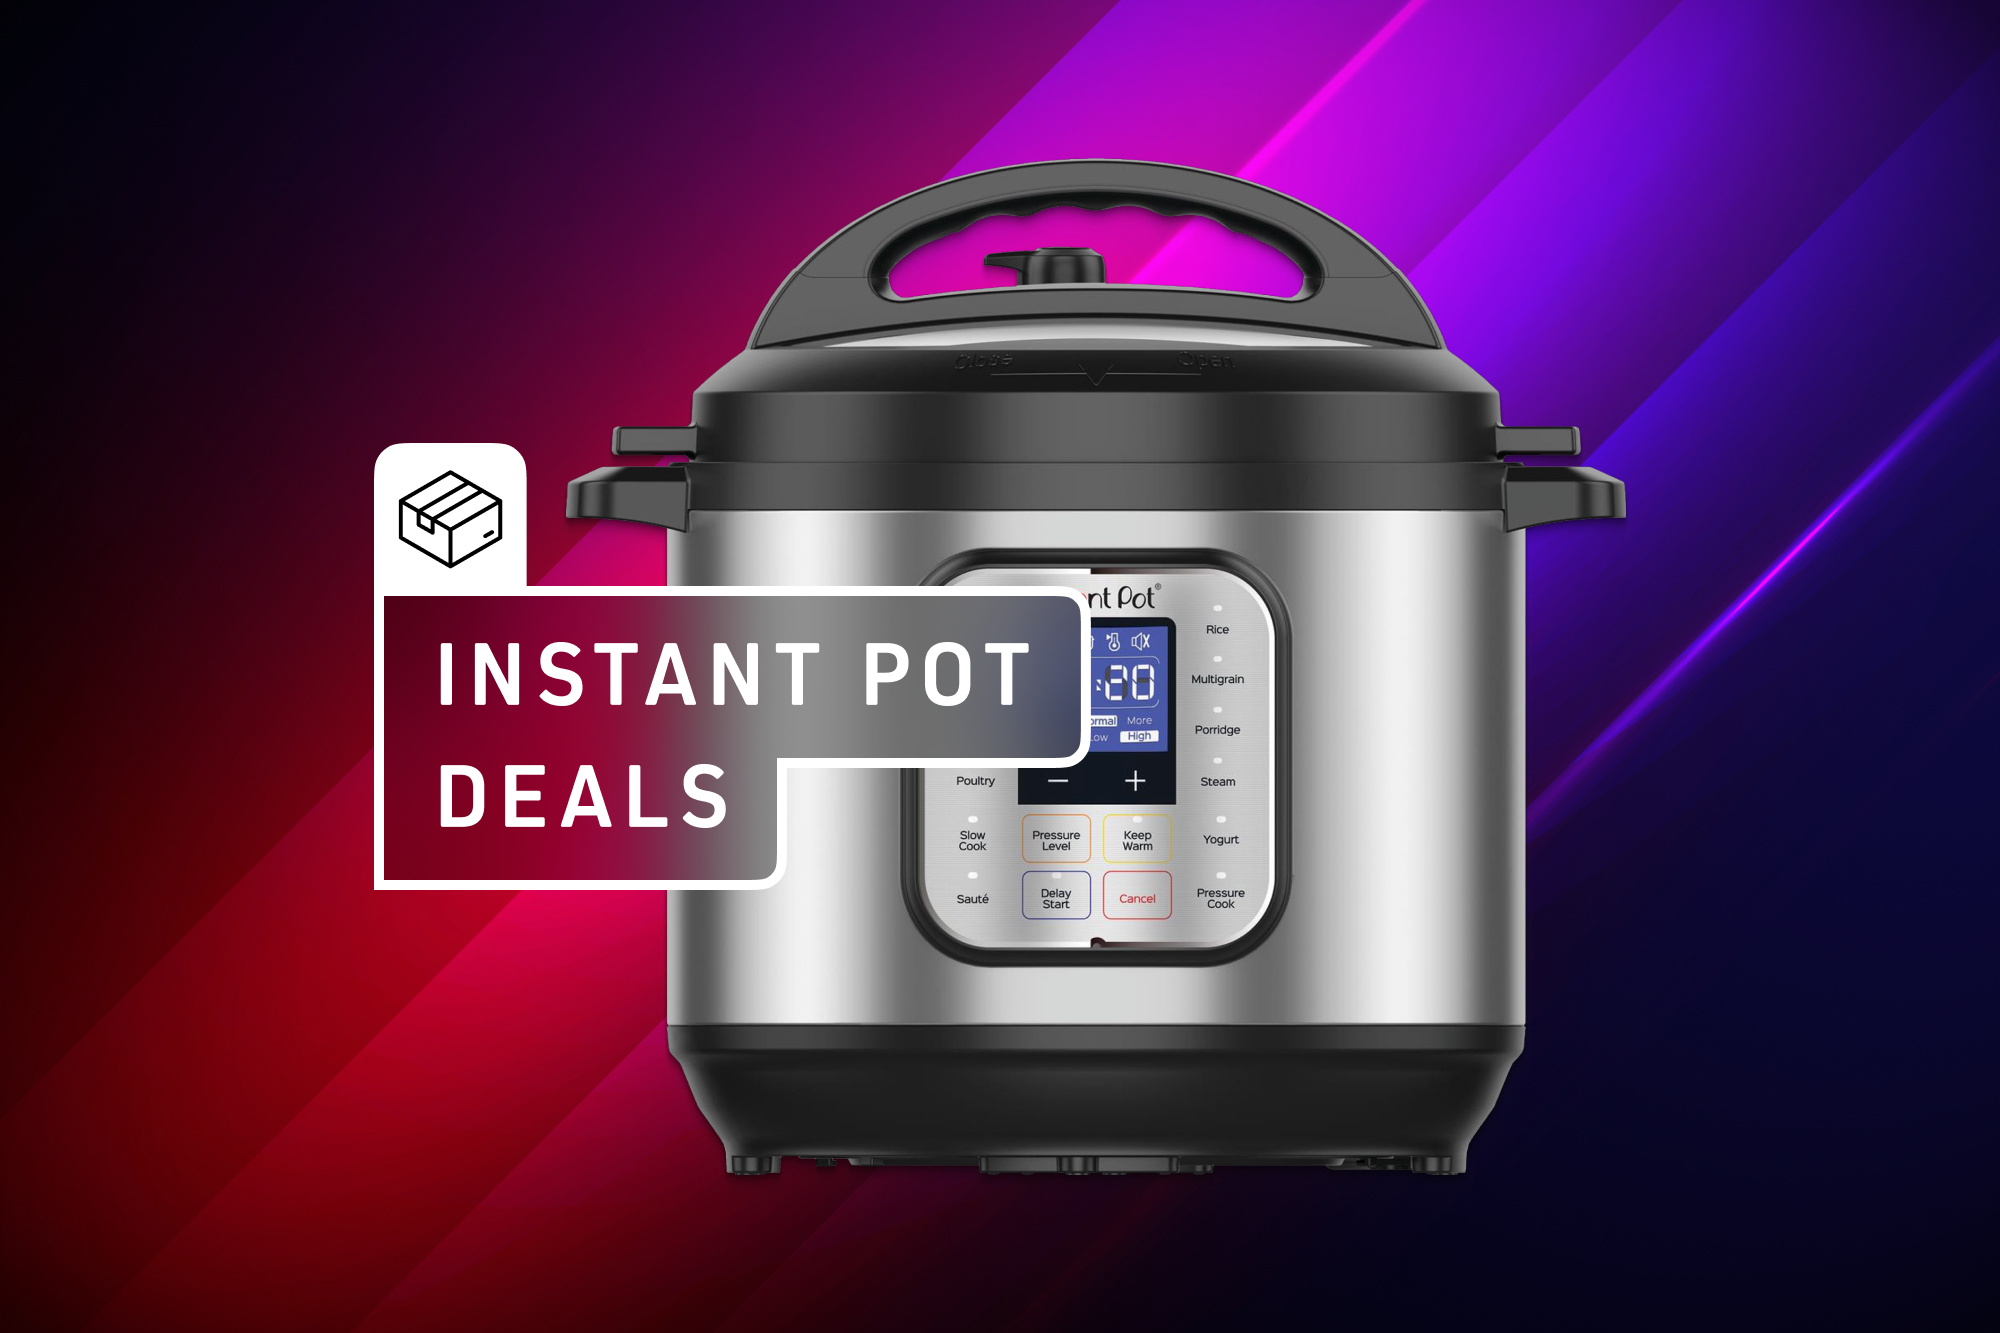 Love Harry Potter, love instant pot, love this duo